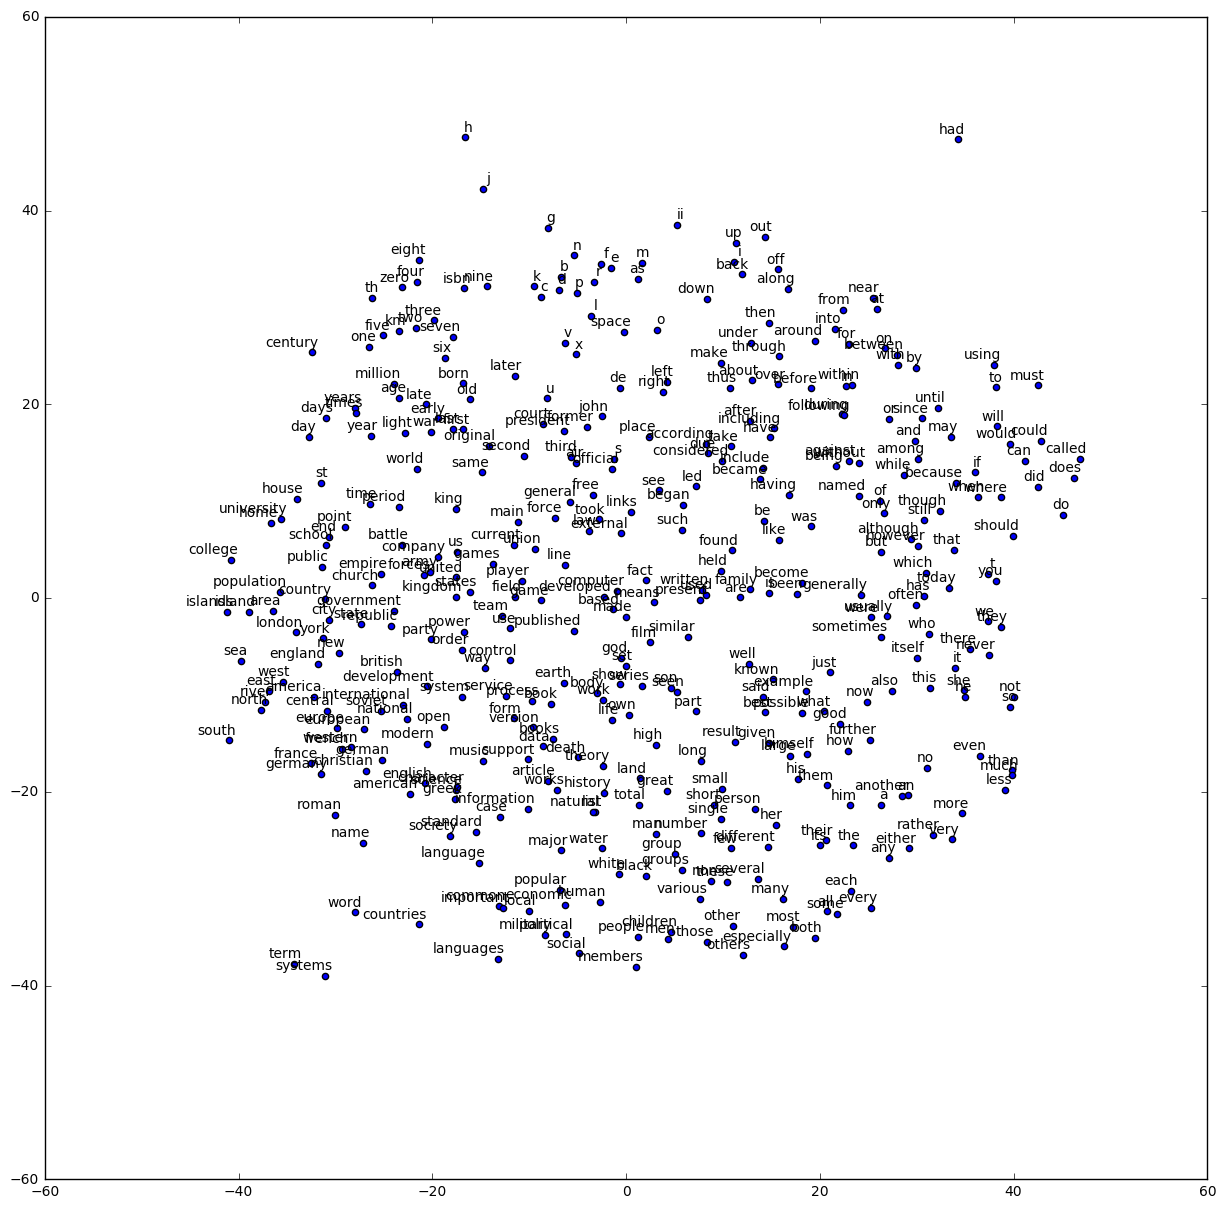 t-sne result